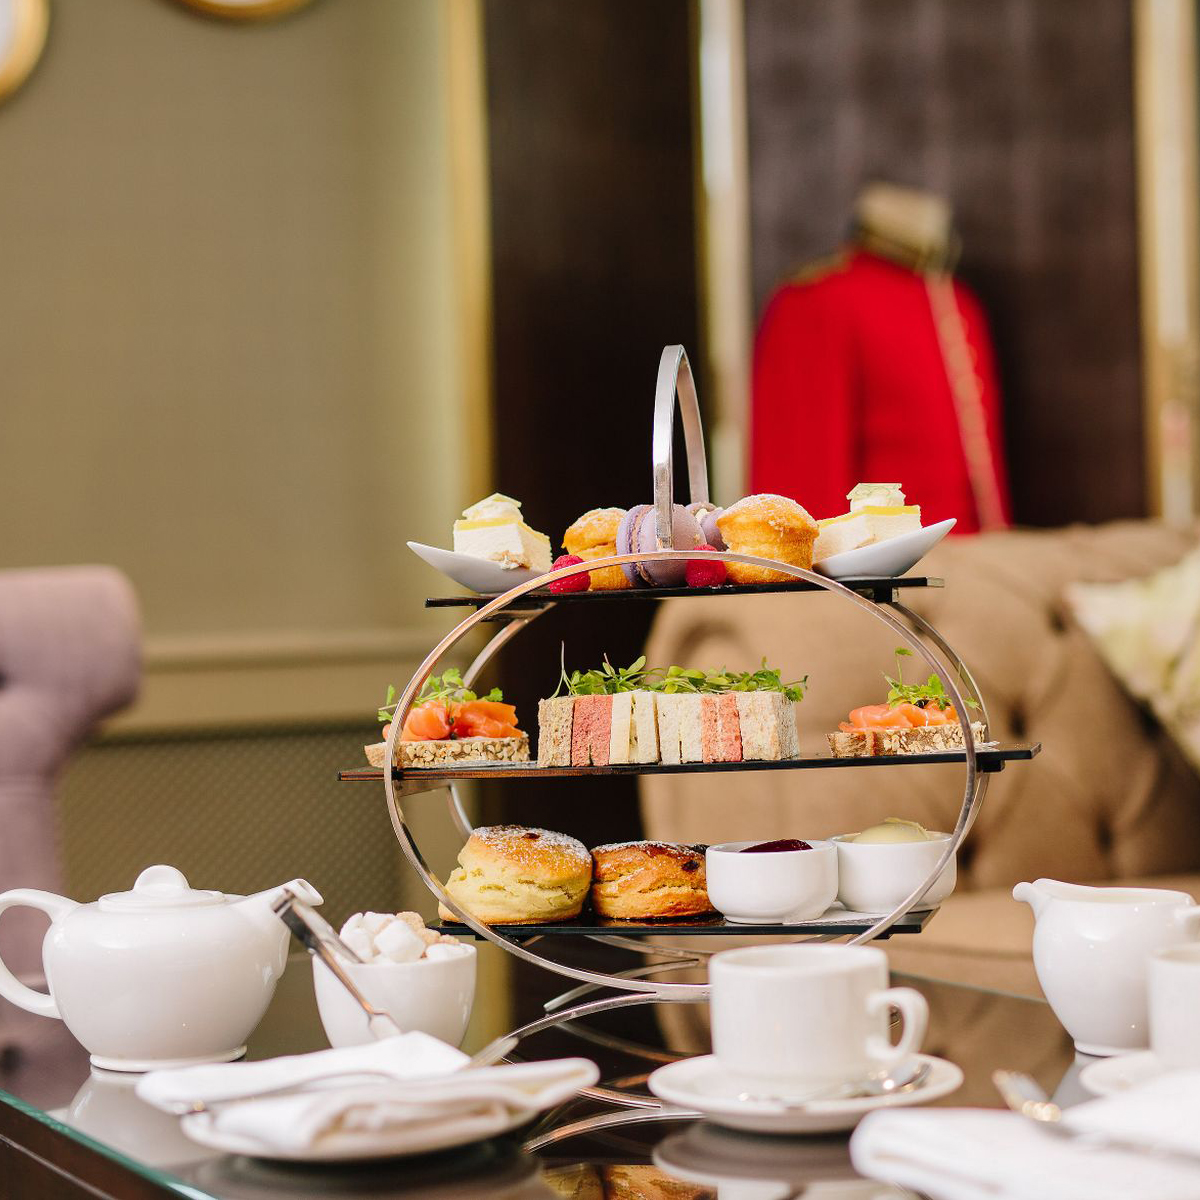 Windsor Castle Entrance & Sparkling Cream Tea at Clarence Brasserie Gift Experience Day